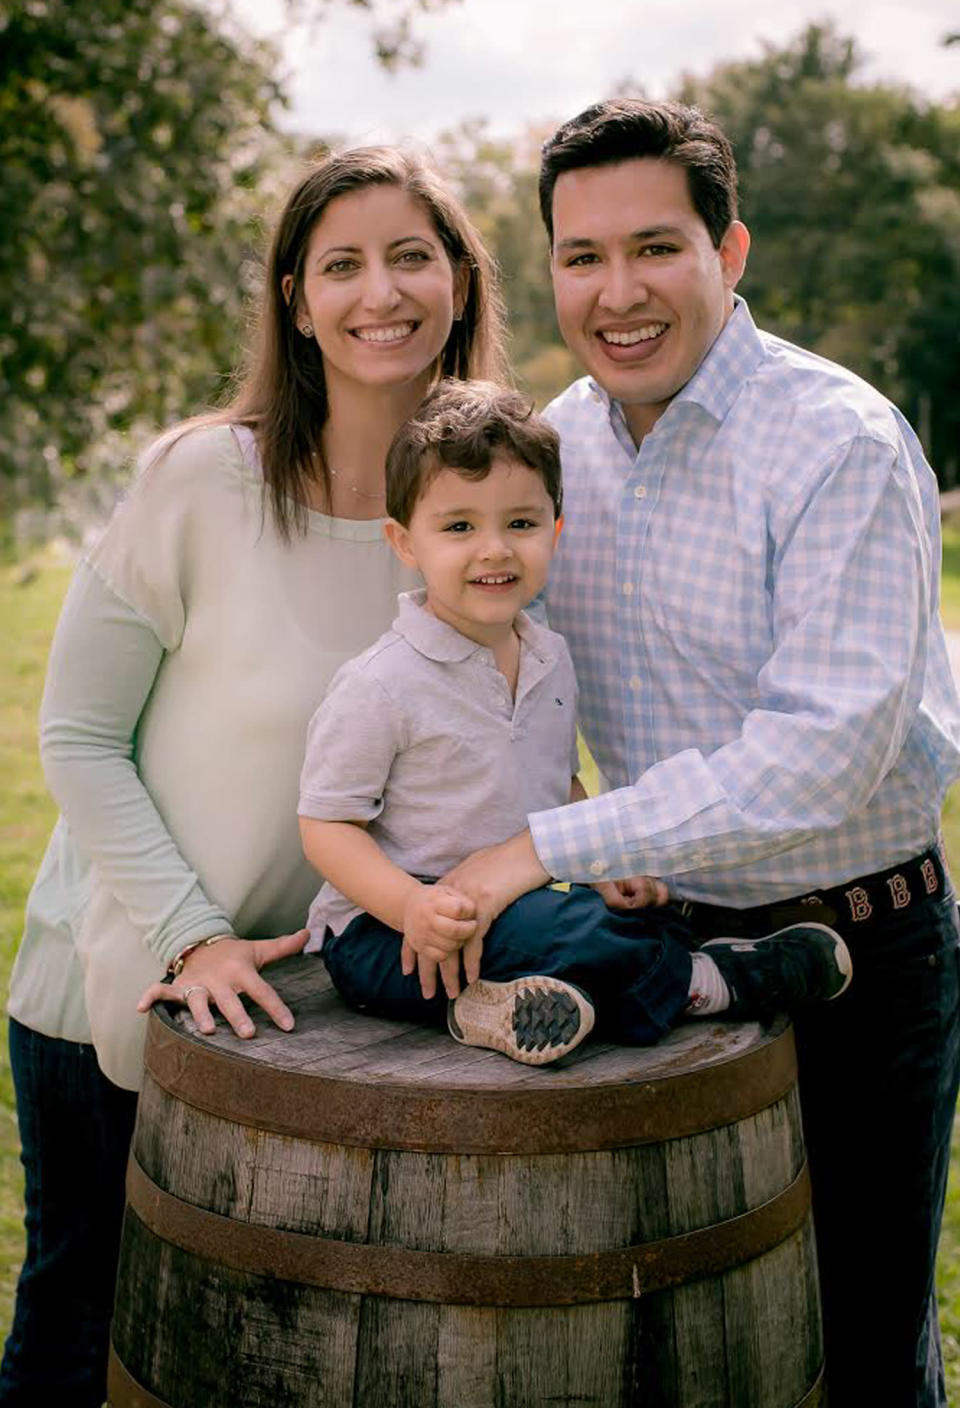 Lindsey Santiago, pictured with her husband and her son, shares what it’s like to parent with MS. (Photo: Shari Stenman, In Perspective Photography)